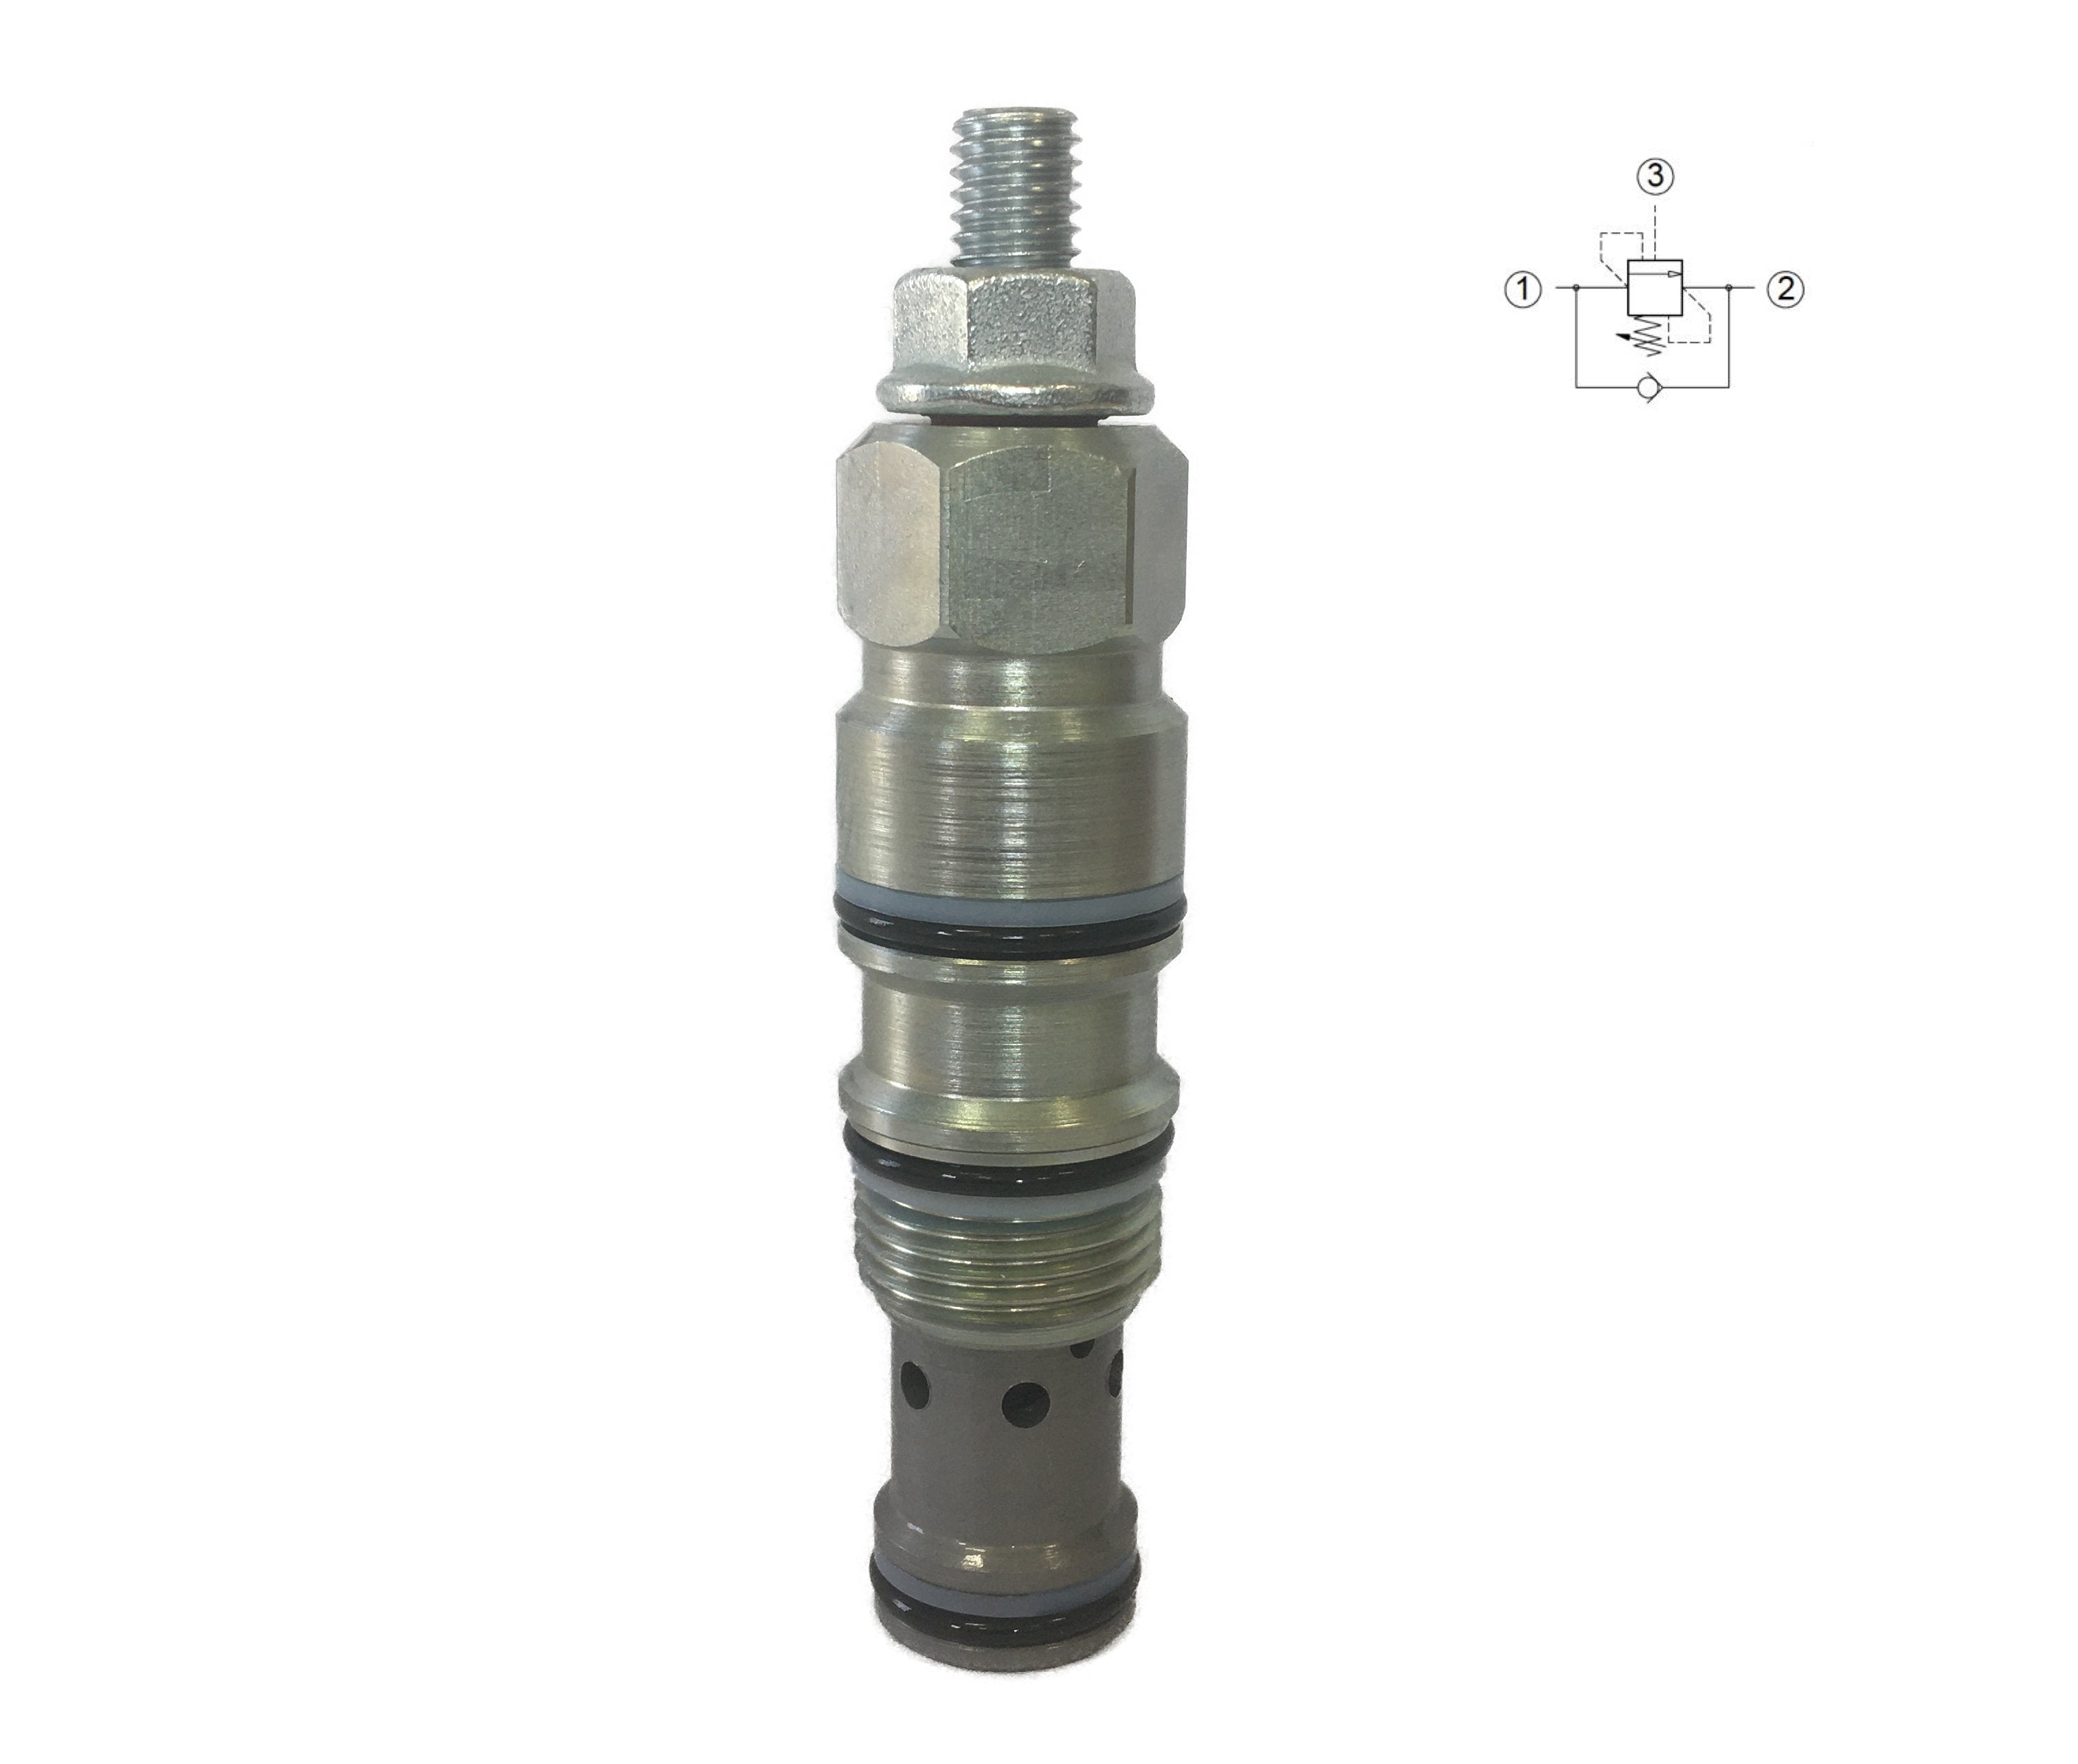 C000D250031100A : Valvole Counterbalance, 3:1, 16 GPM, 5000psi, 2030 to 5075psi adjustable, 3625psi Preset, T-11A